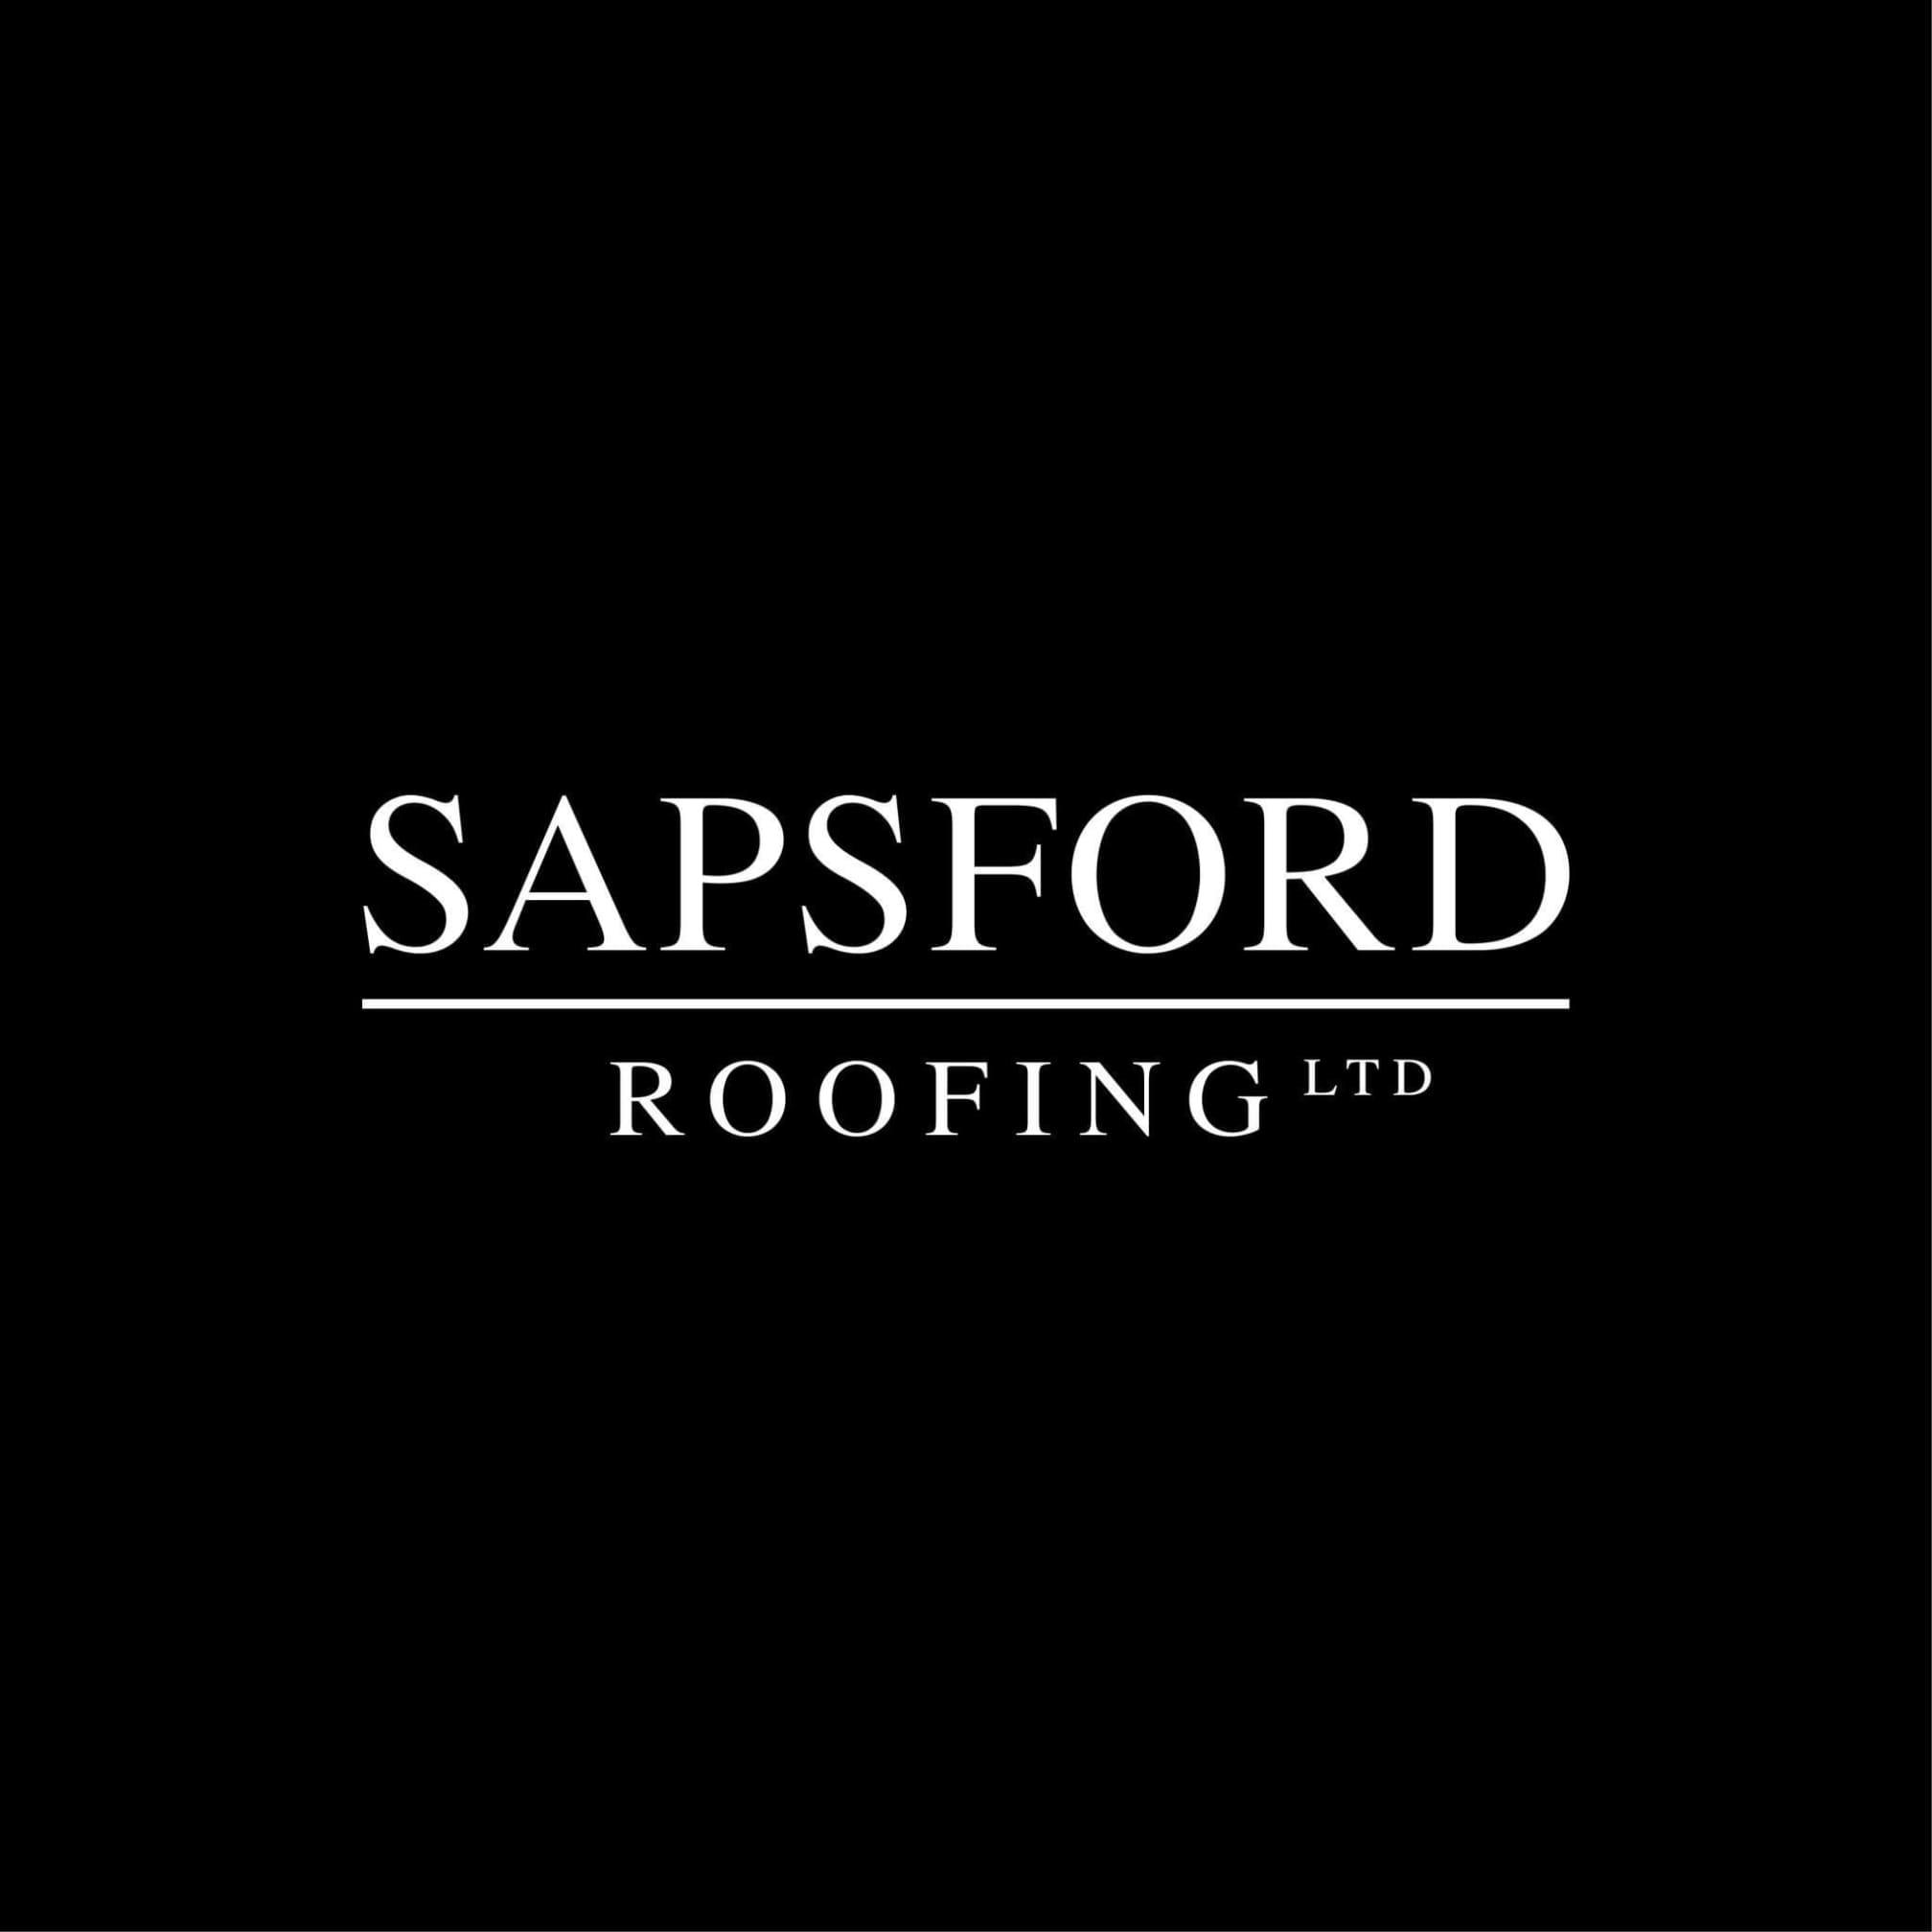 Images Sapsford Roofing Ltd